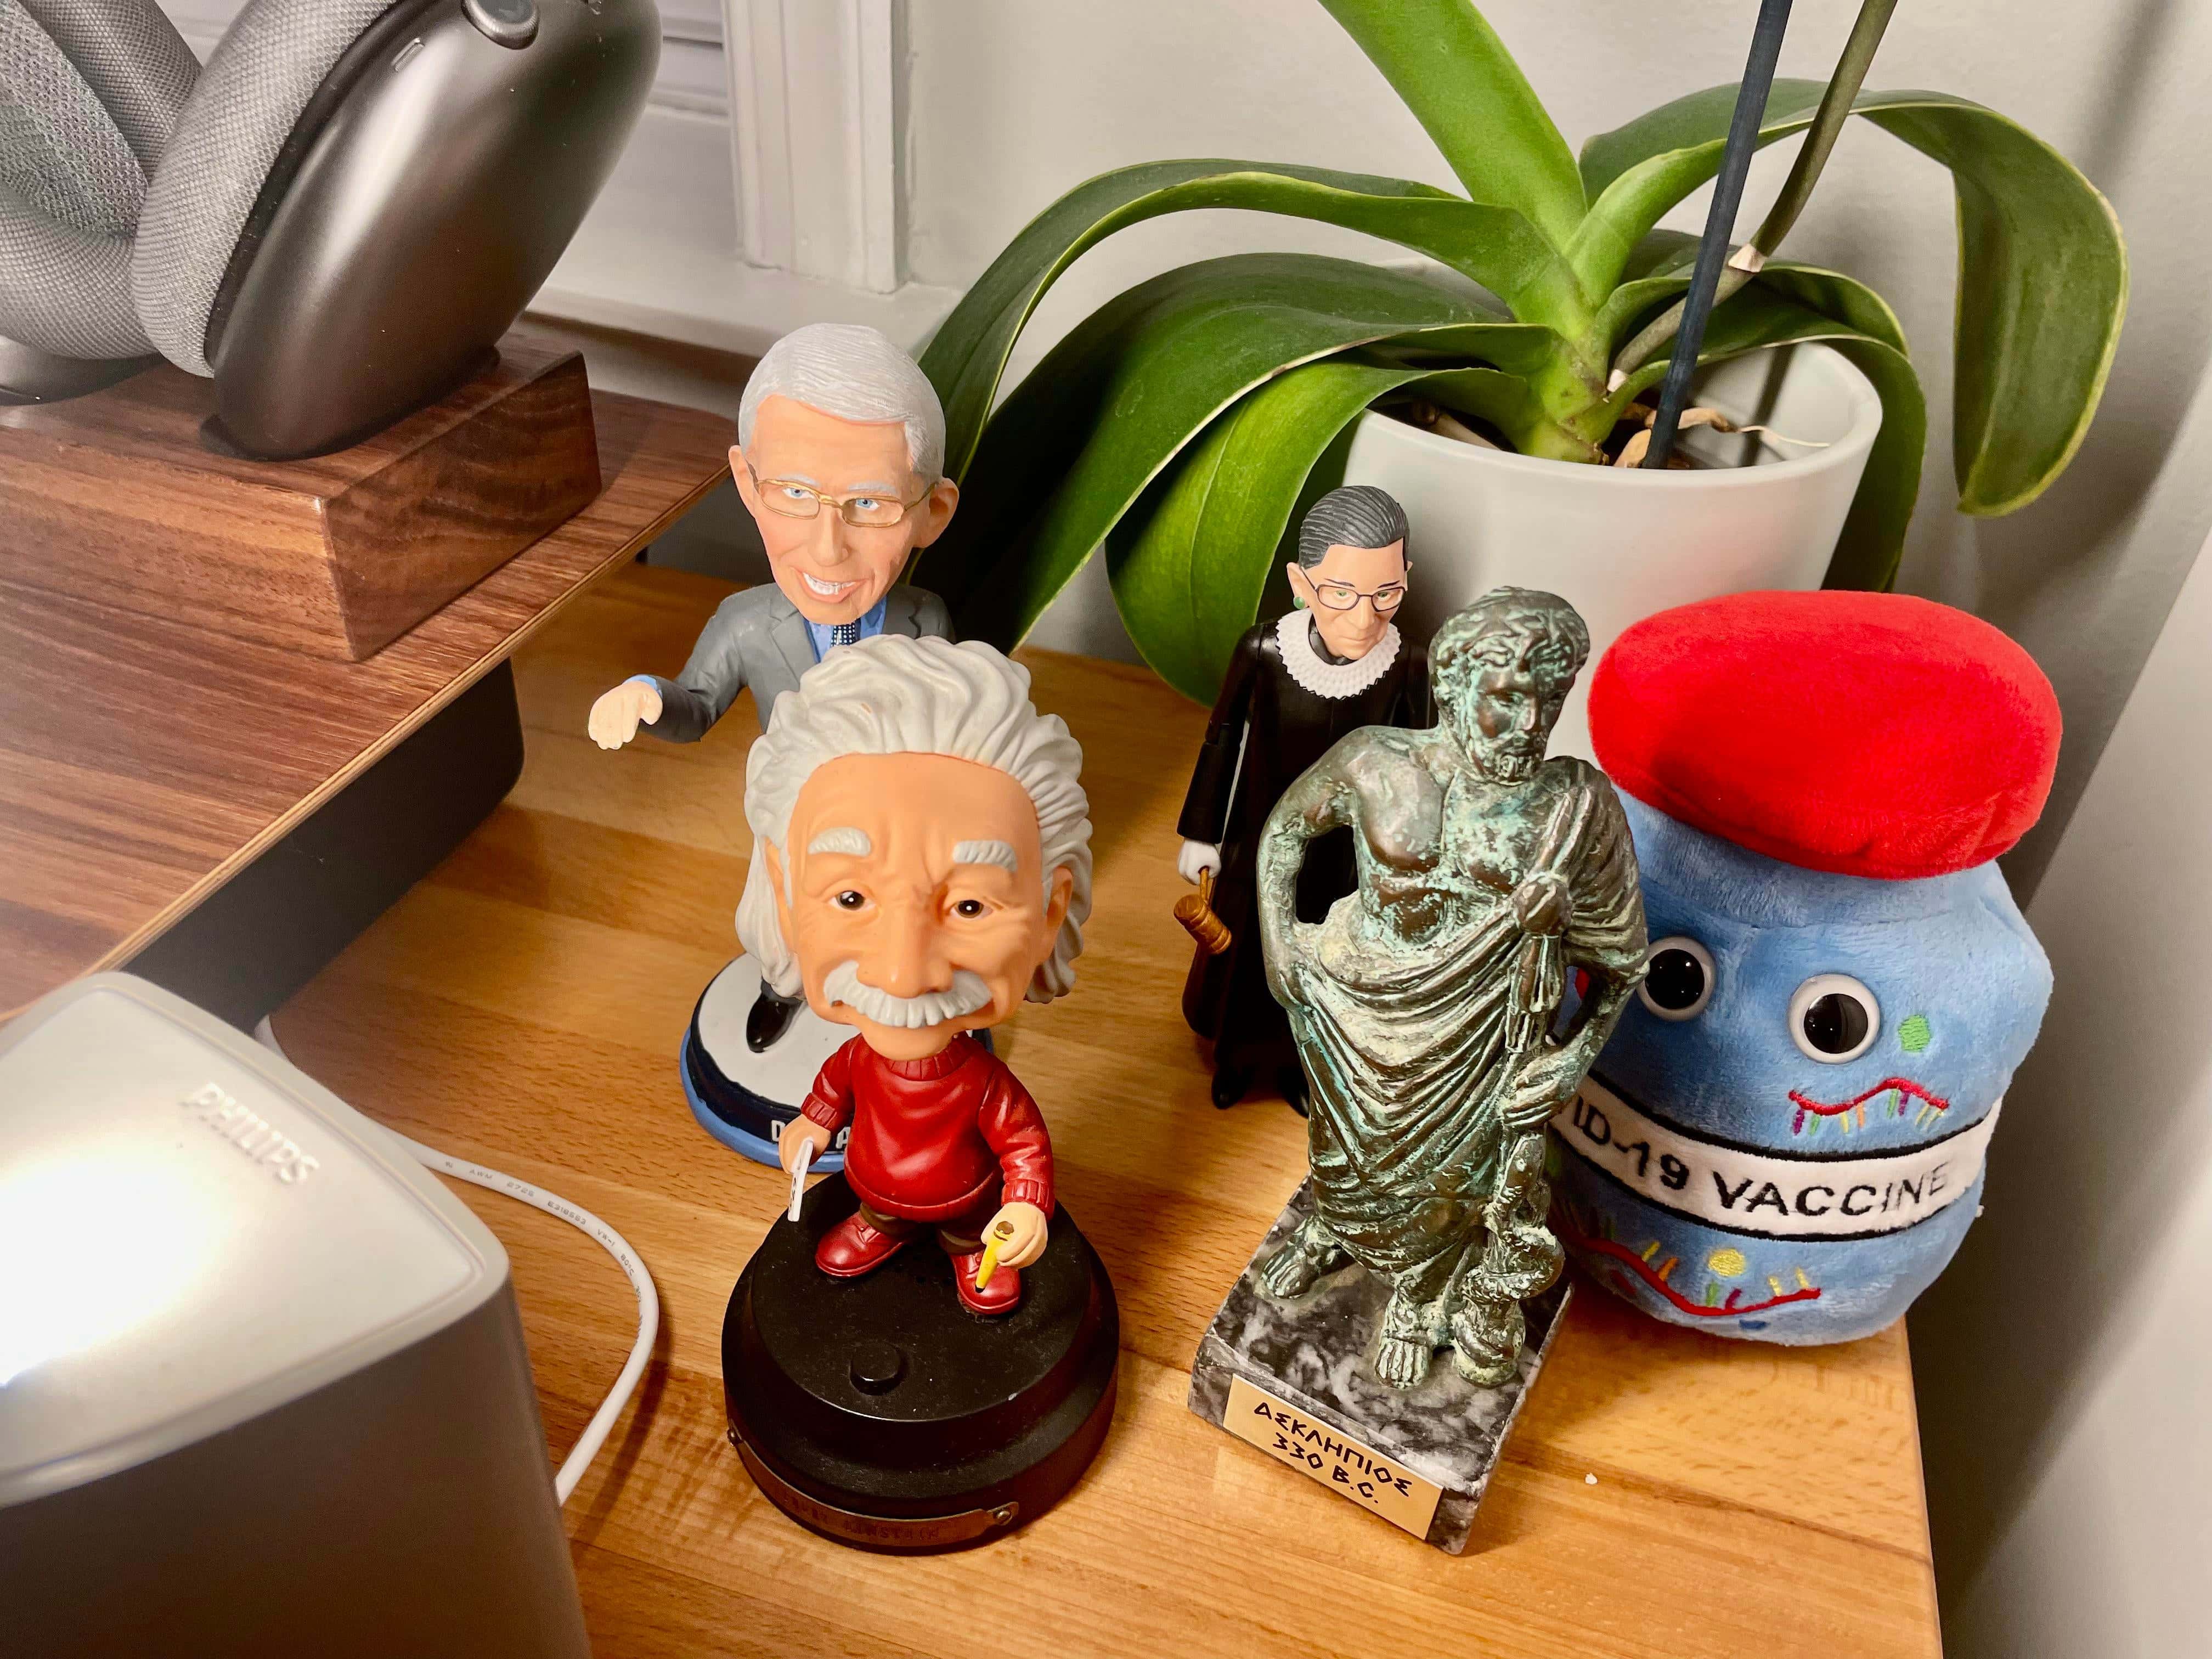 Einstein, Fauci, RBG, the Greek god of medicine -- that's quite the welcoming committee.